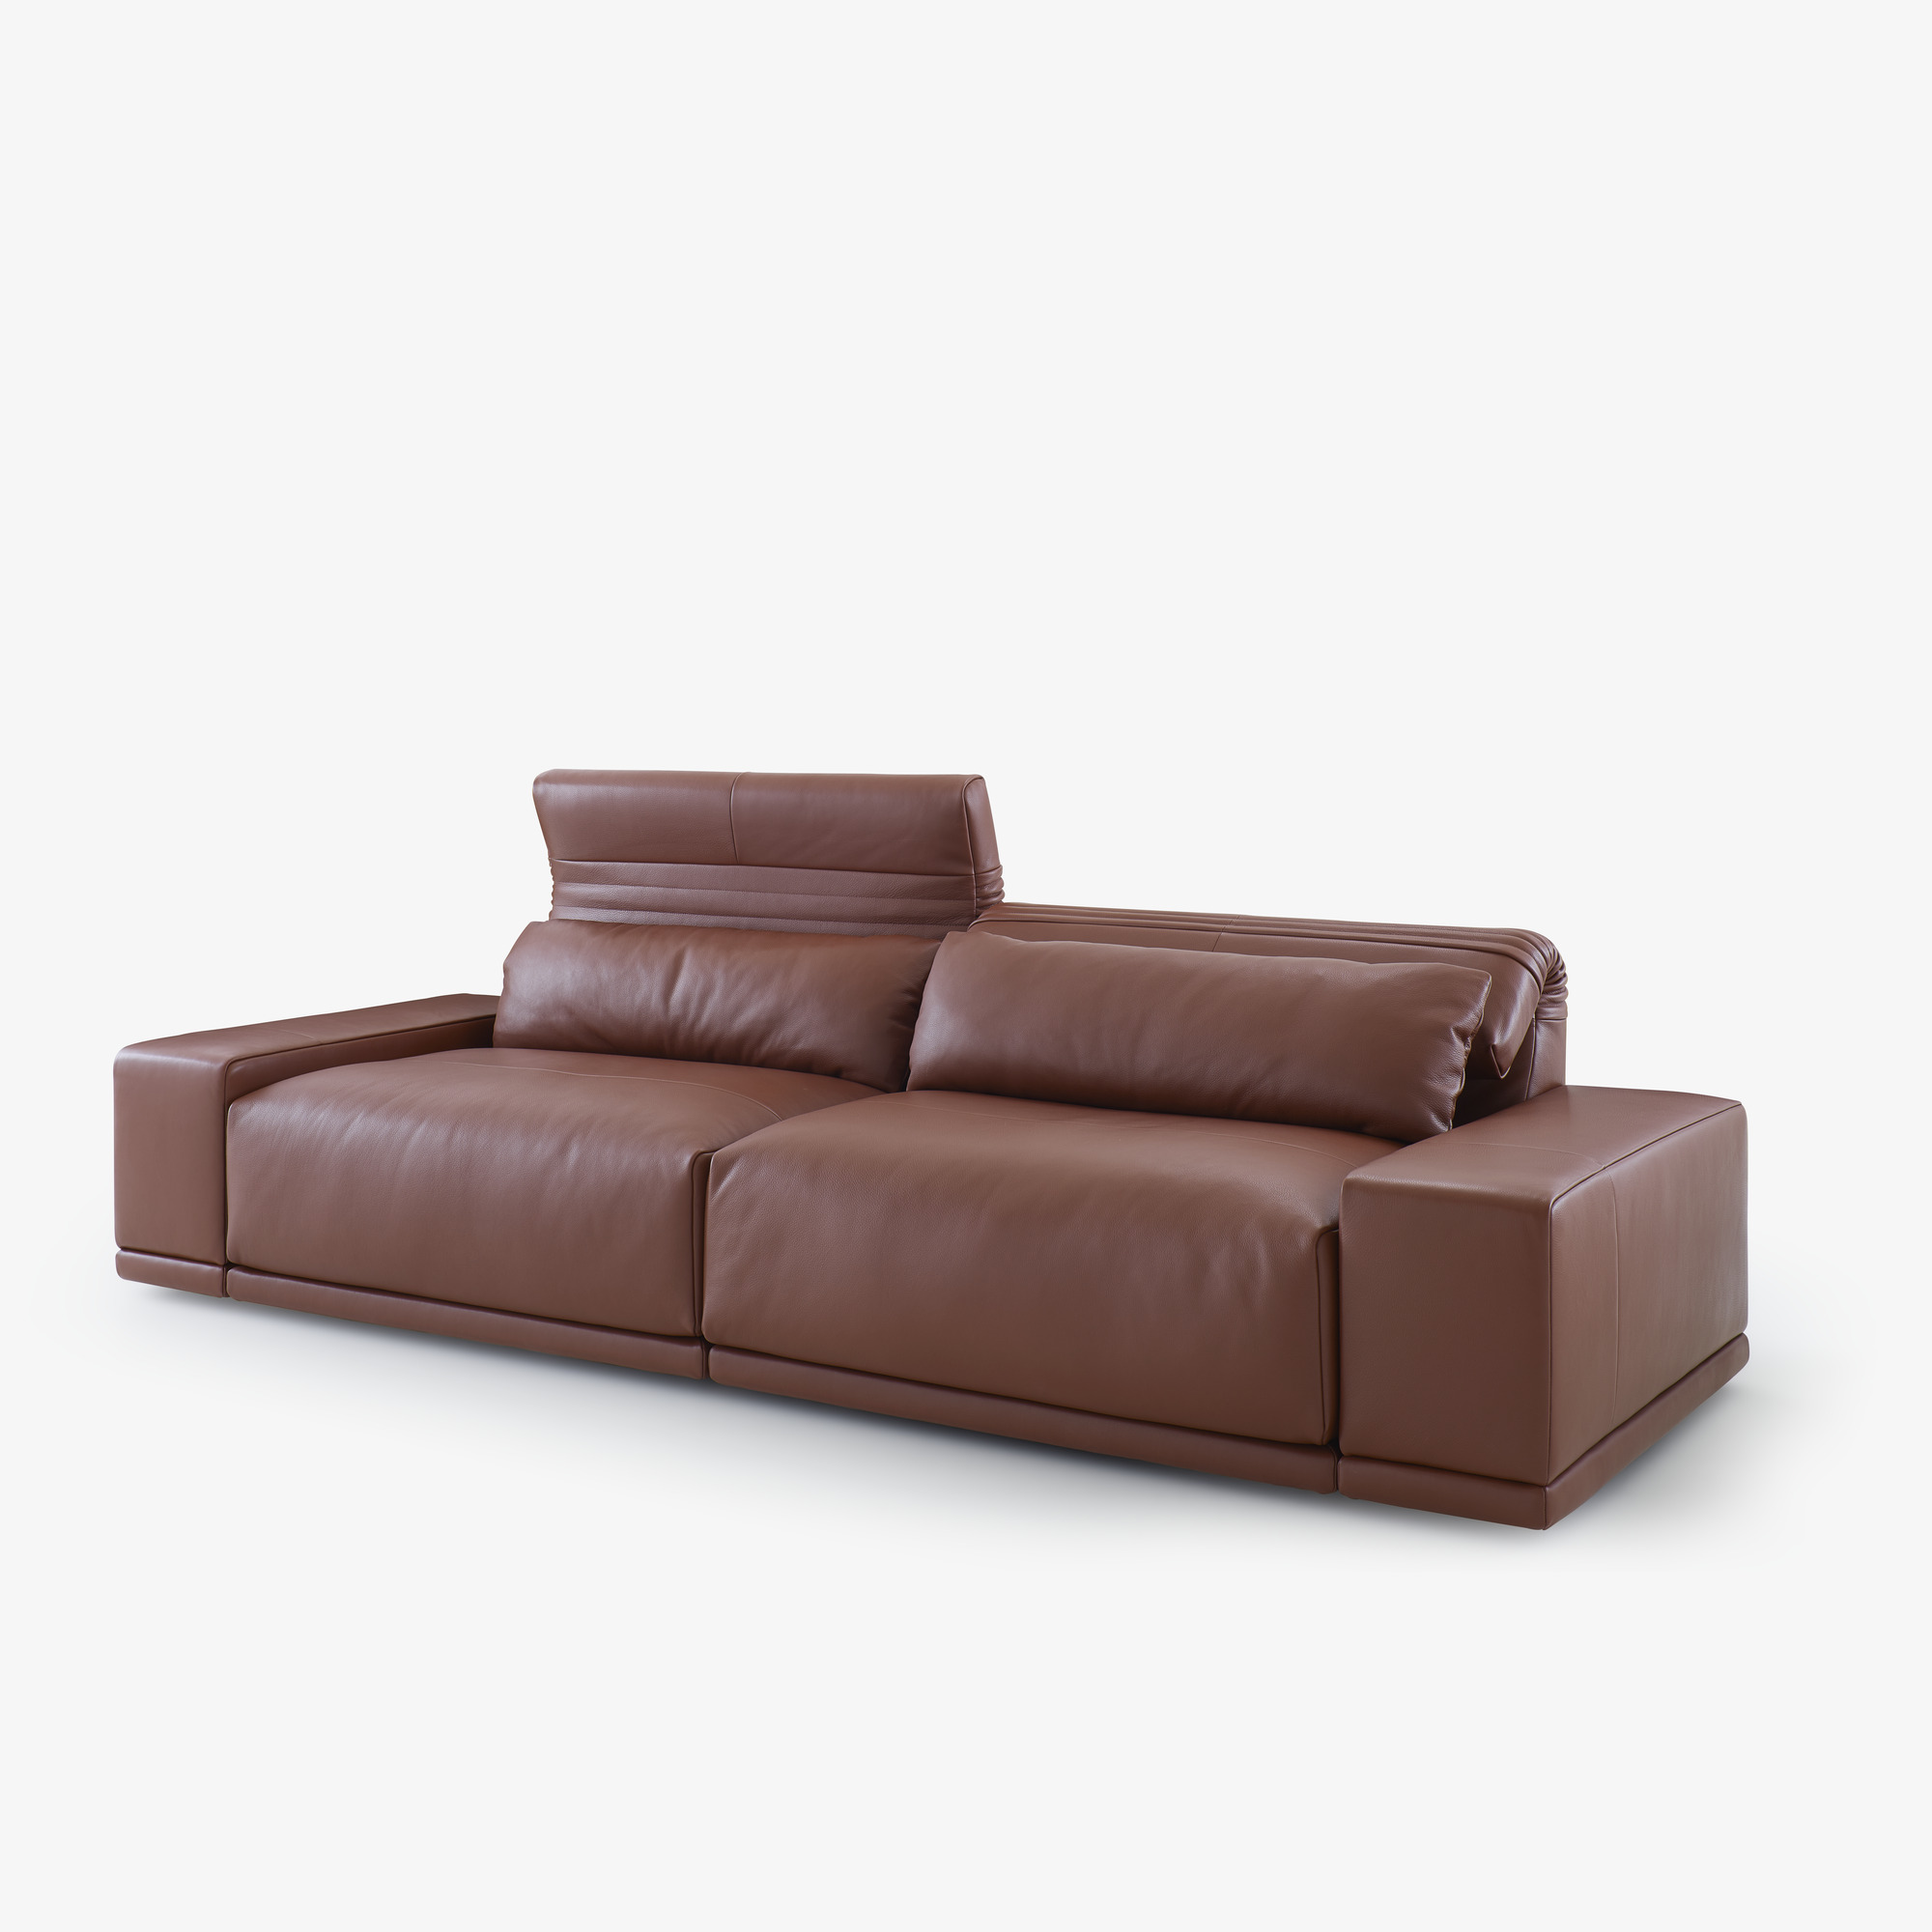 Image Large settee with broad armrest without lumbar cushion 3